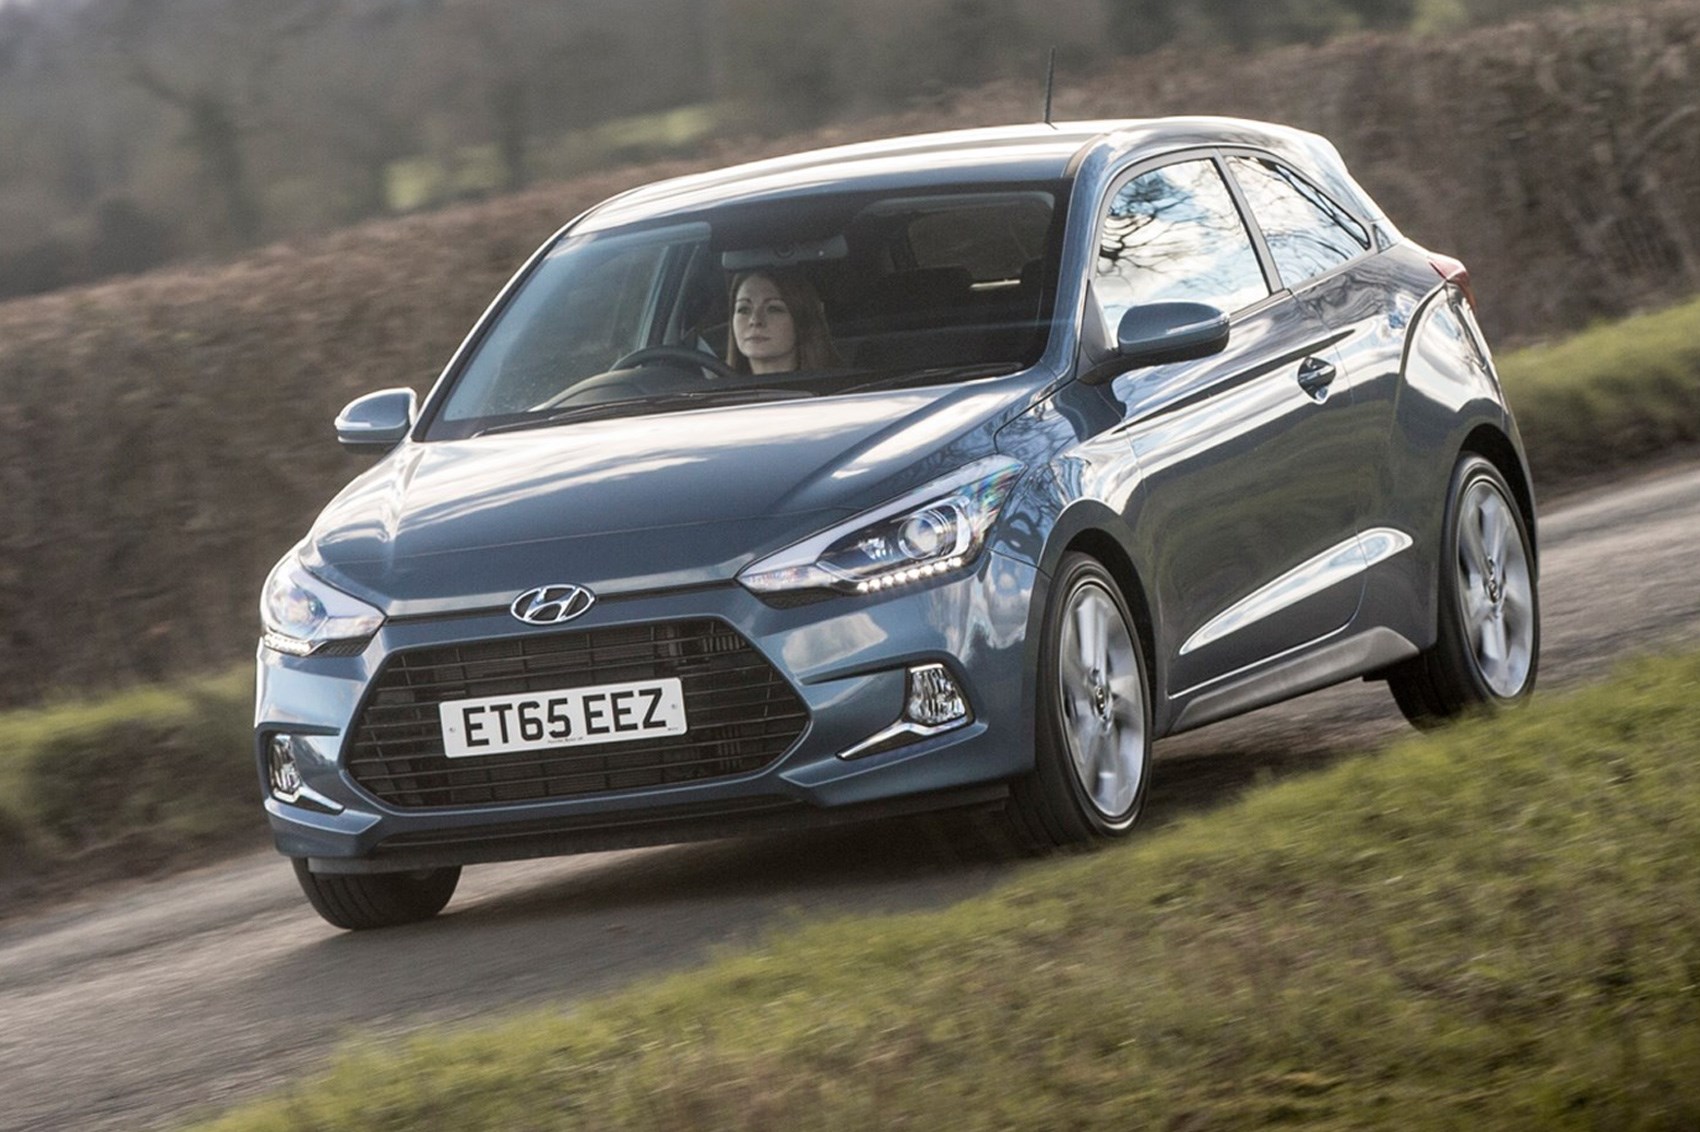 09 The Most Reliable Cars Revealed-Hyundai i20